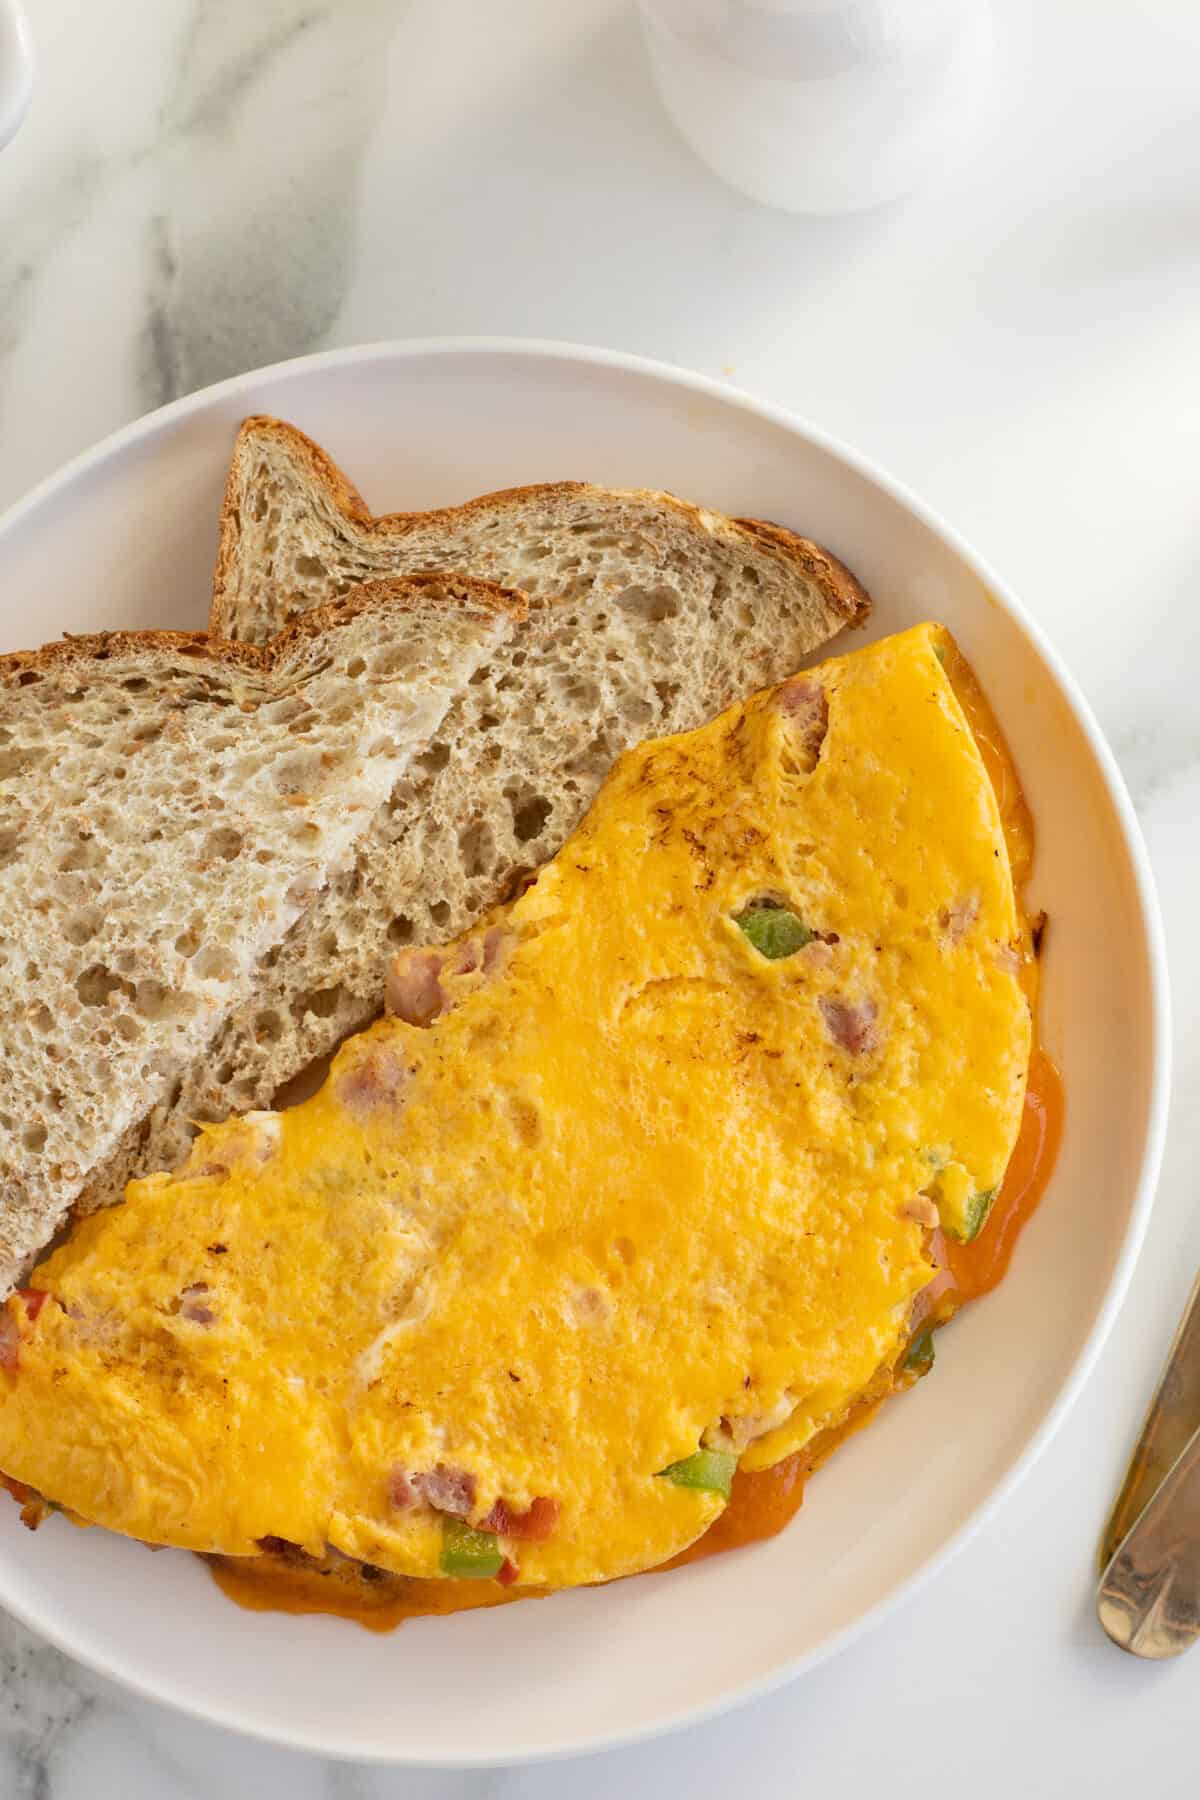 Denver omelet on a plate with a slice of toast